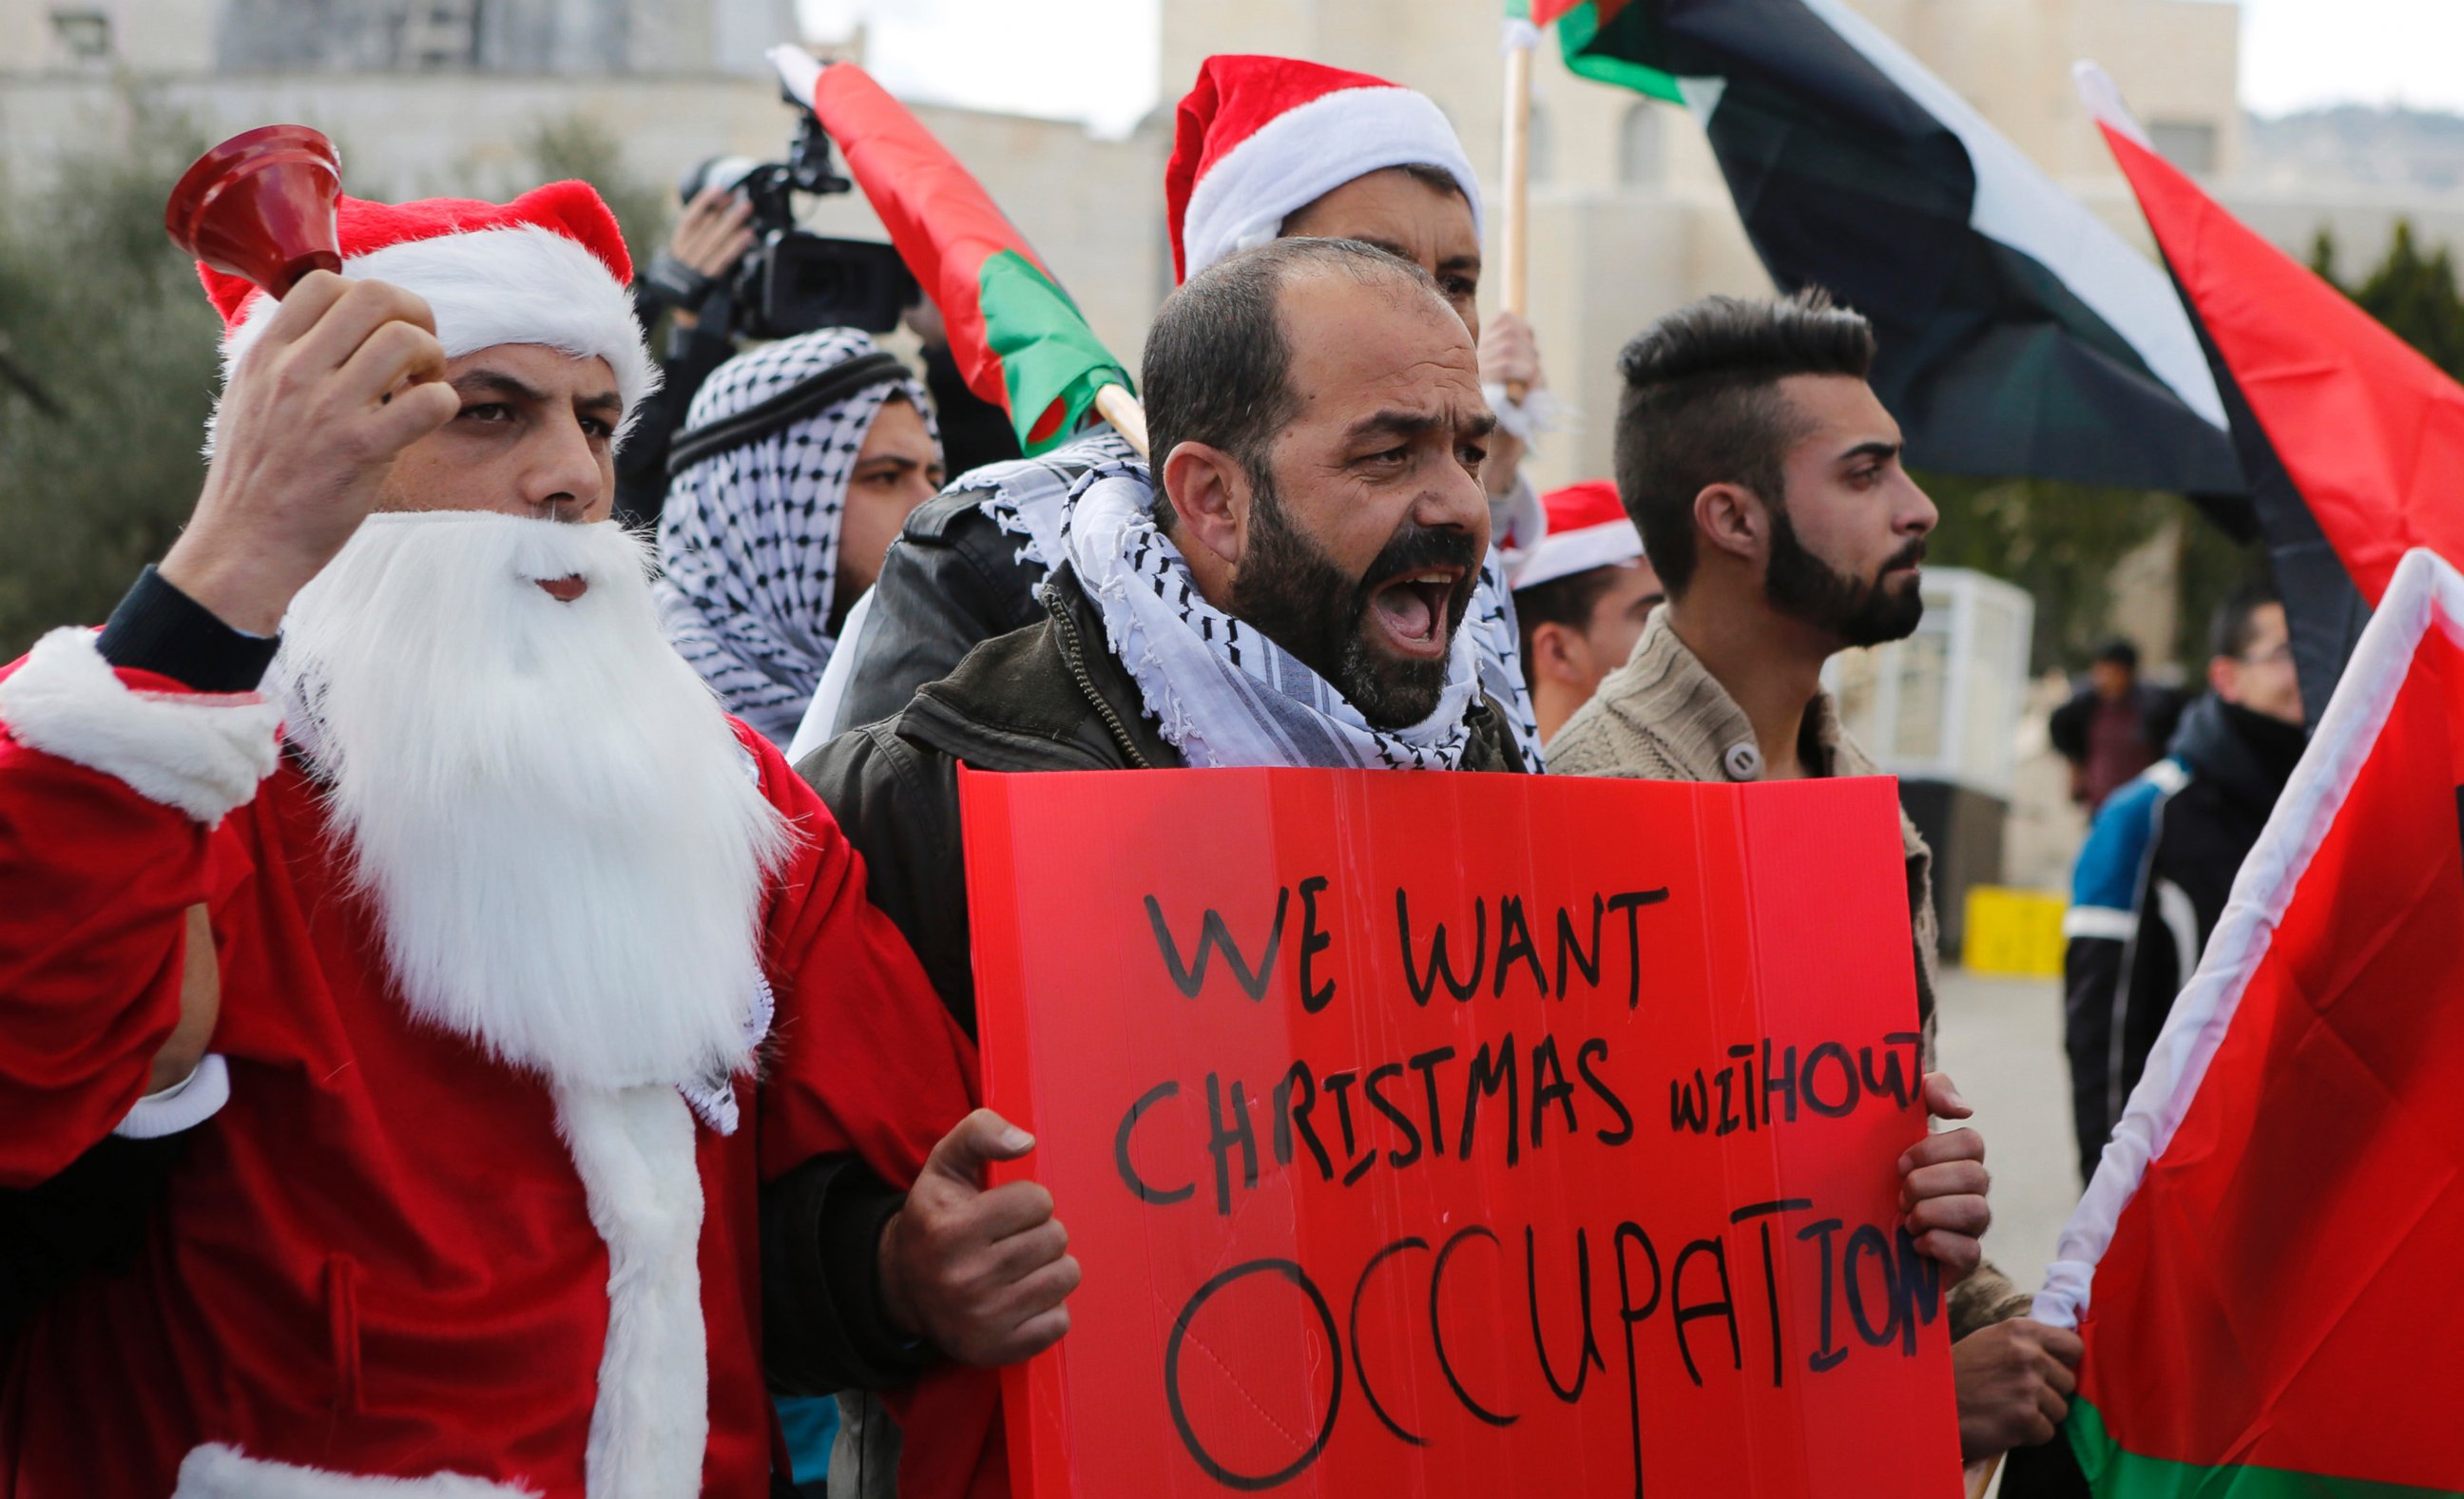 PHOTO: A Palestinian protestors demonstrate against Israeli settlements during Christmas, near a checkpoint in the West Bank city of Bethlehem, Dec. 23, 2014. 